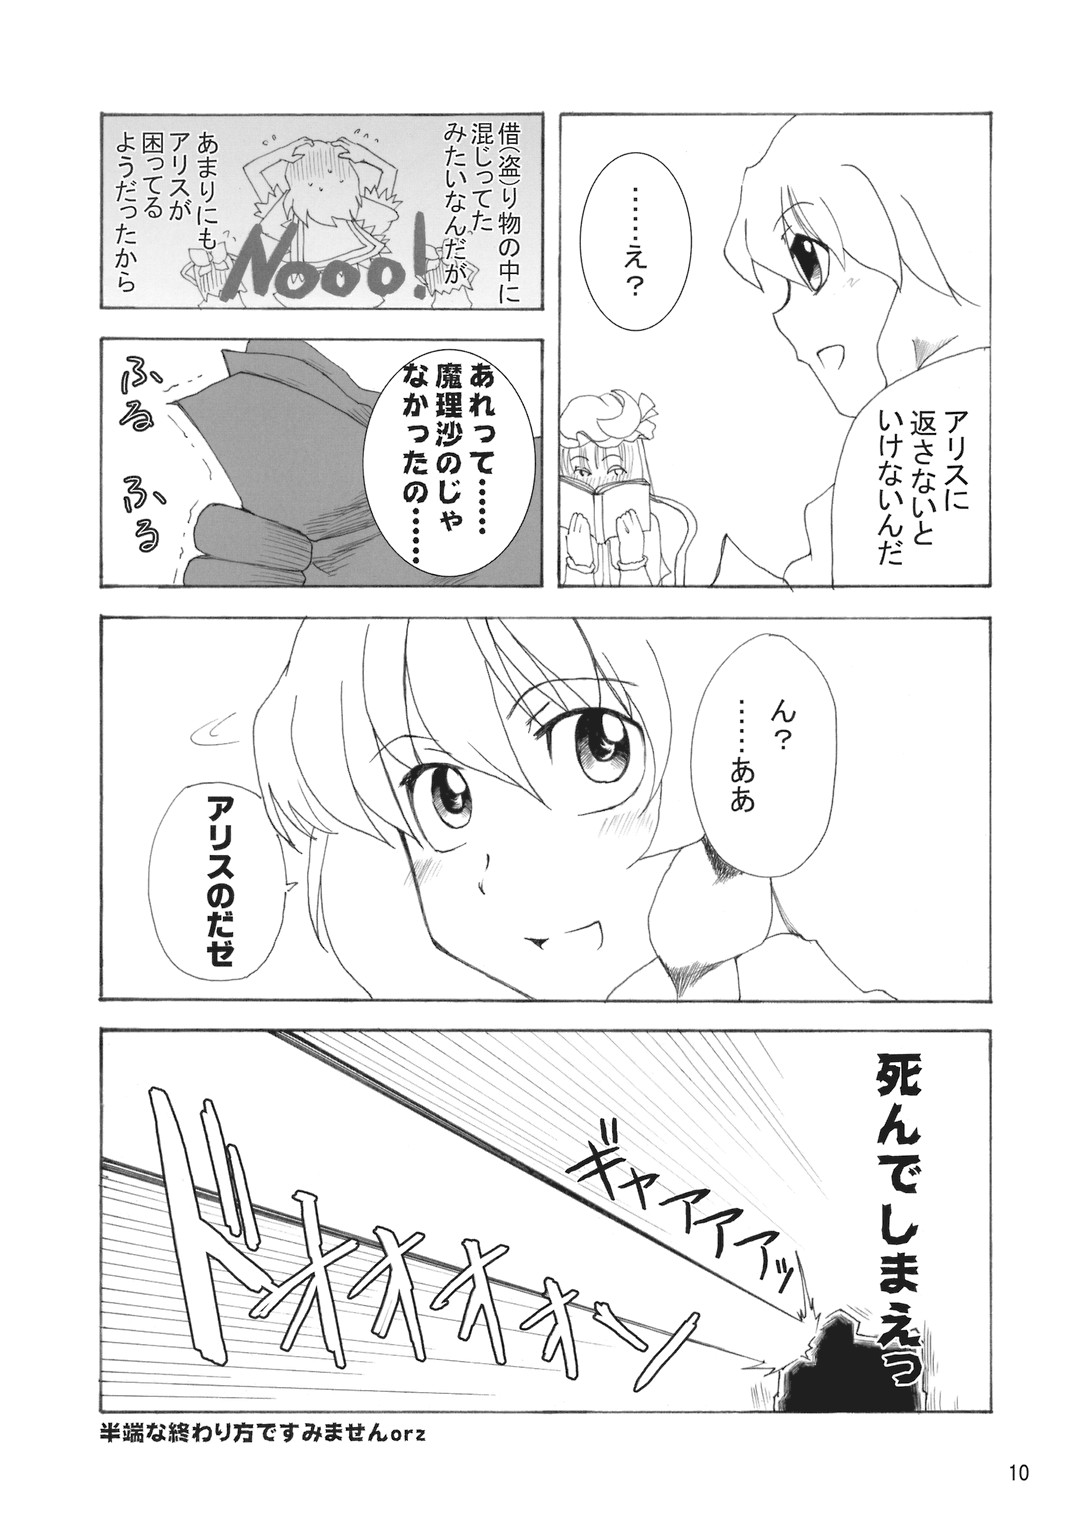 (Reitaisai 3) [Pigeon Blood (Various)] Four of a Kind (Touhou Project) page 10 full